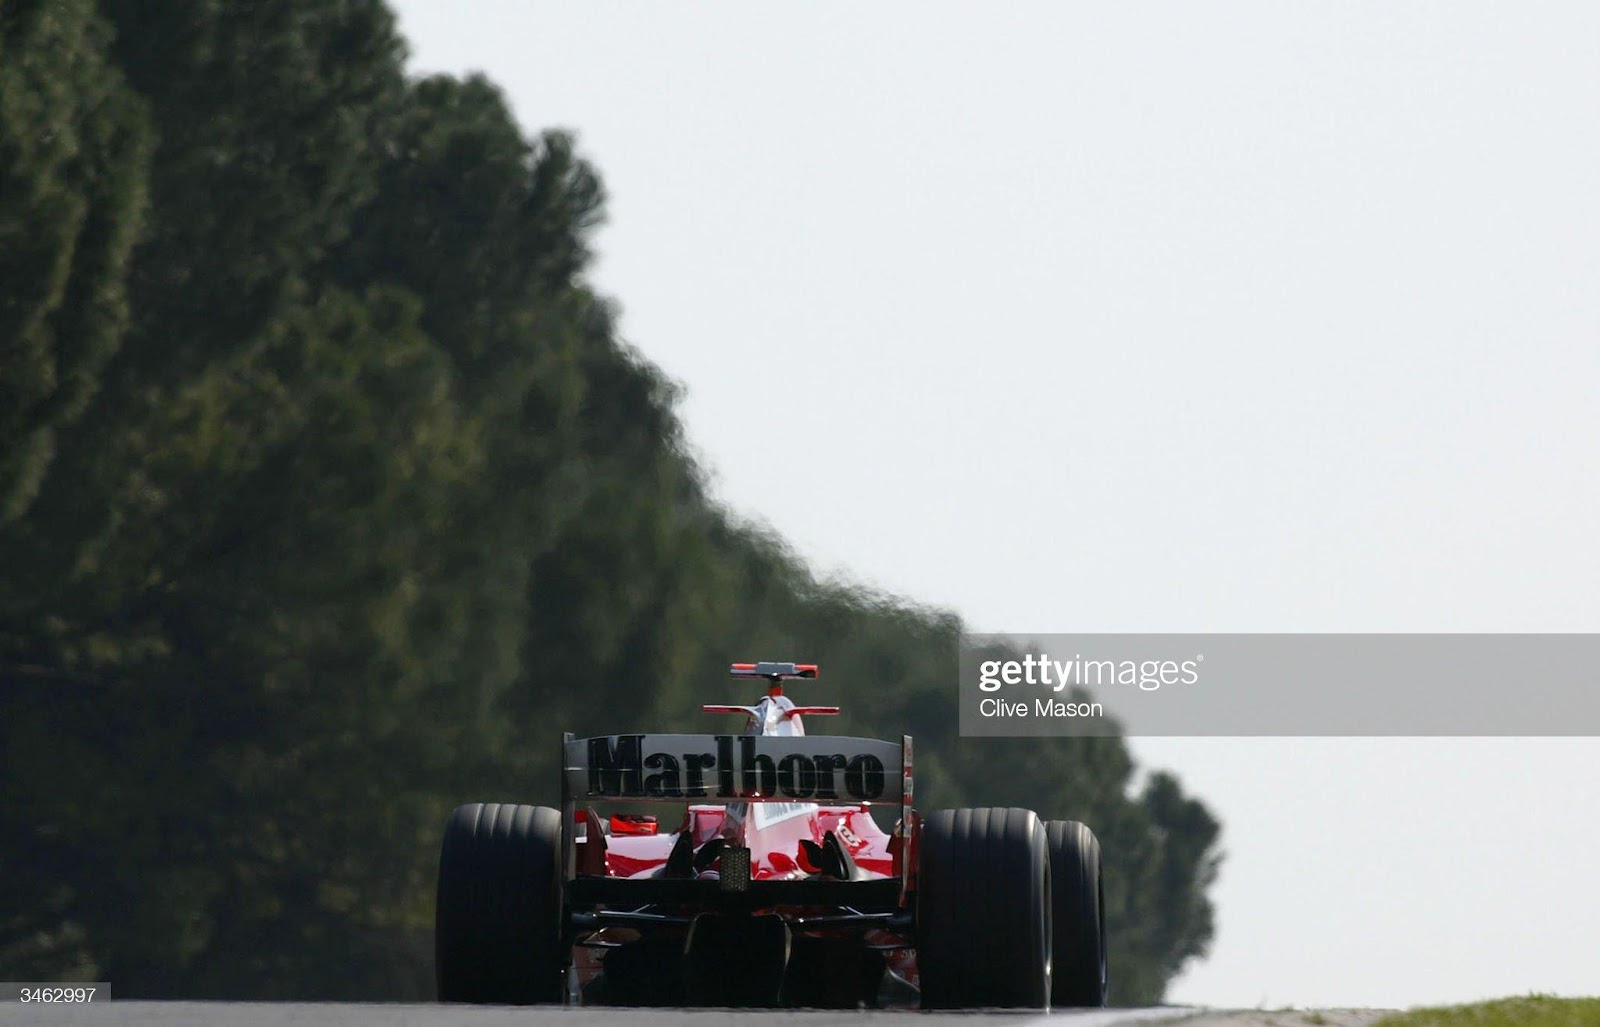 Michael Schumacher, Ferrari, in action during the practise session prior to qualifying for the San Marino F1 Grand Prix on April 24, 2004, at the San Marino circuit in Imola, Italy.